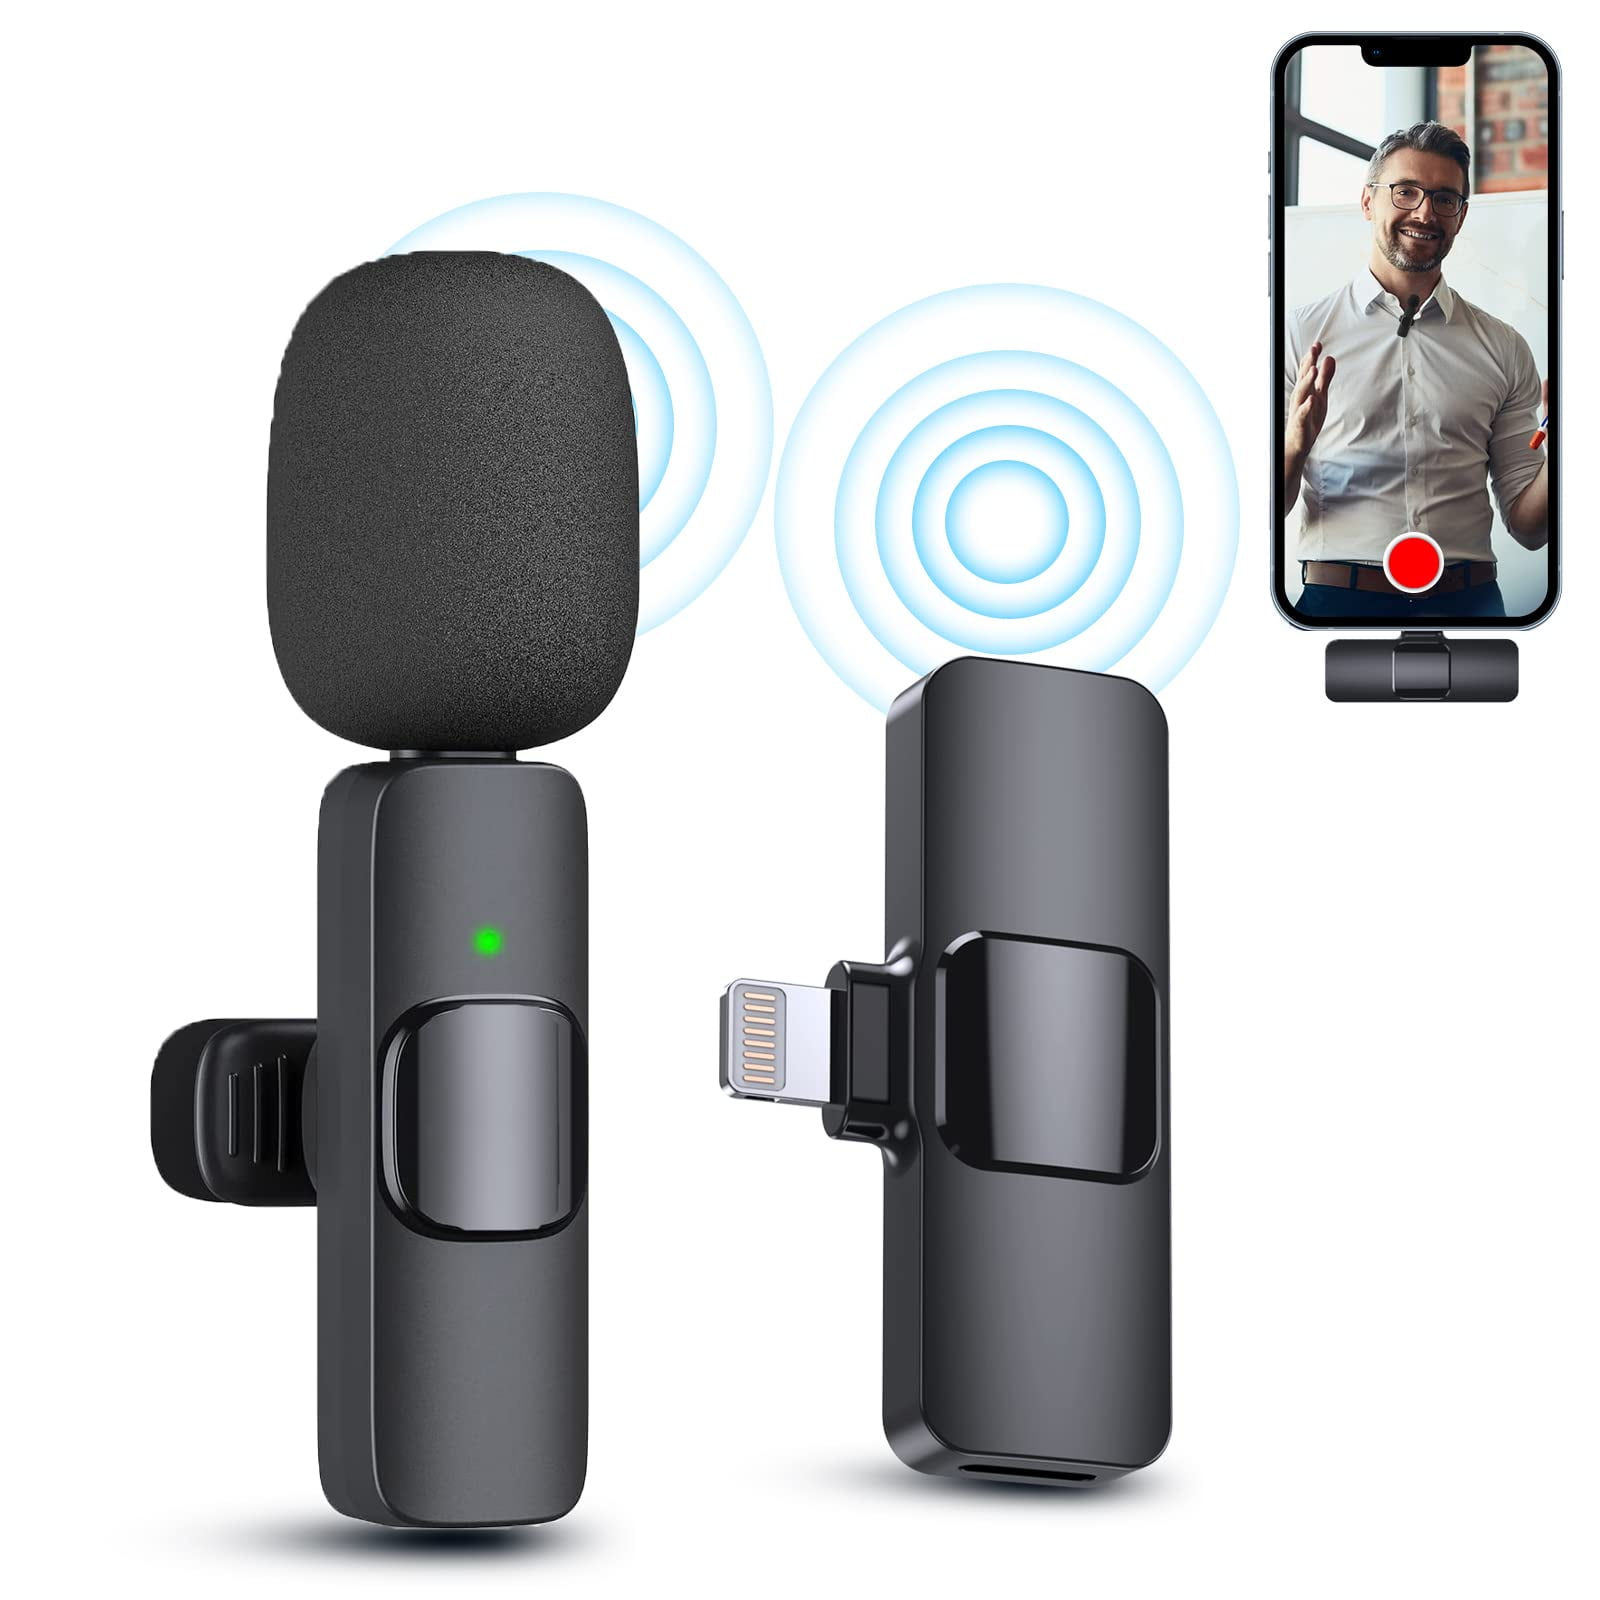 Virego Wireless Lavalier Microphone for Iphone Ipad，Plug-Play Auto-Connection Mini Mic for Video Recording Vlogging, Live Stream, Tiktok, YouTube, Interview